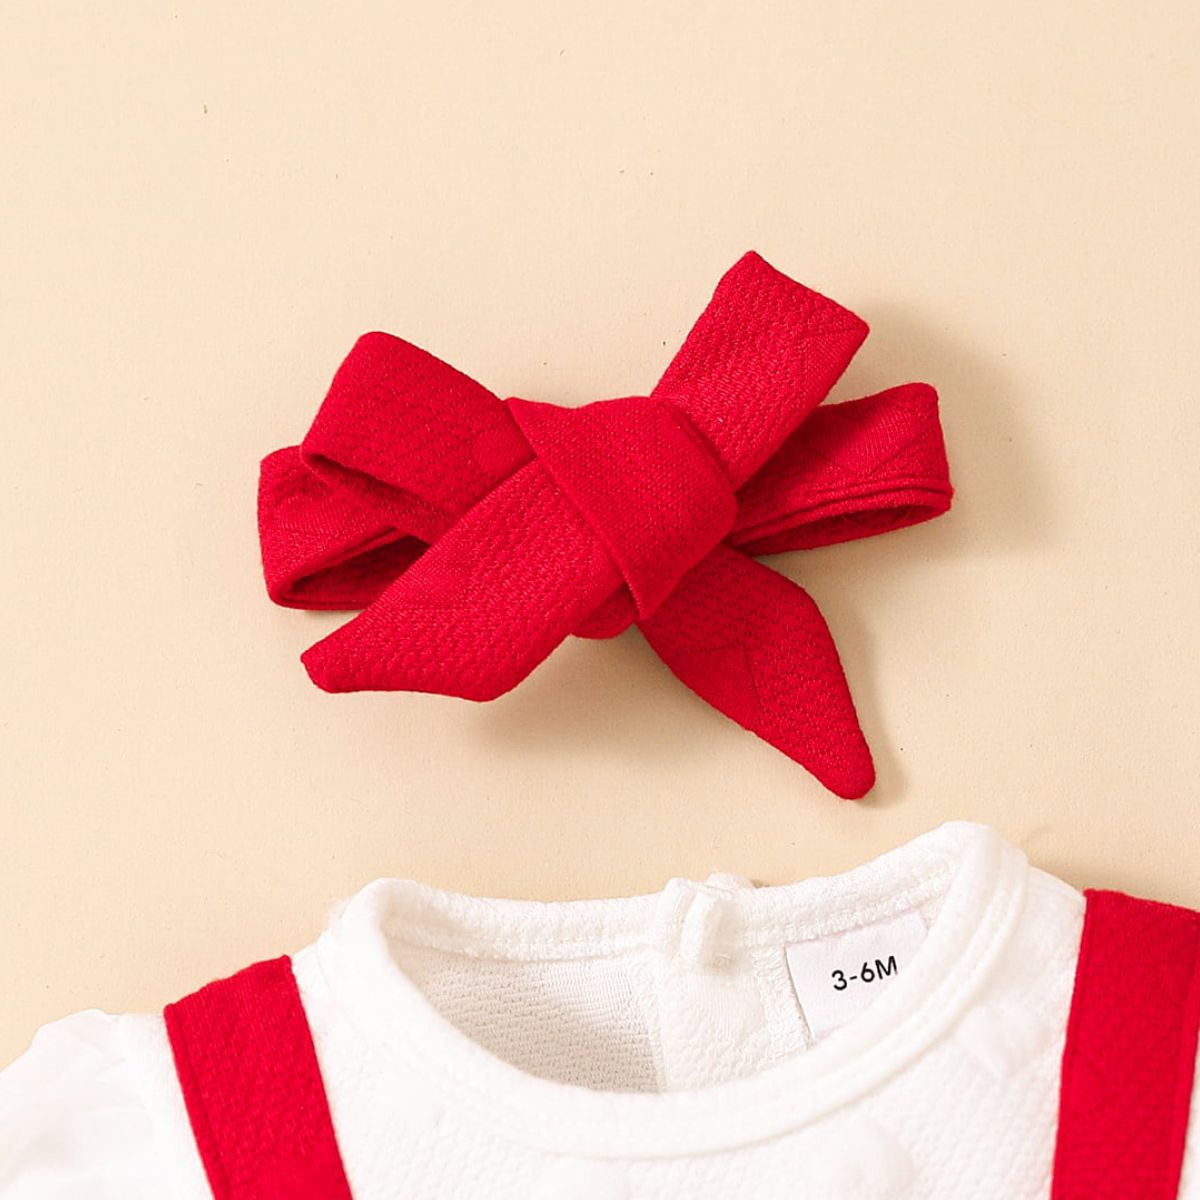 Baby Girl Two-Tone Bow Detail Dress, Sizes 6M - 18M